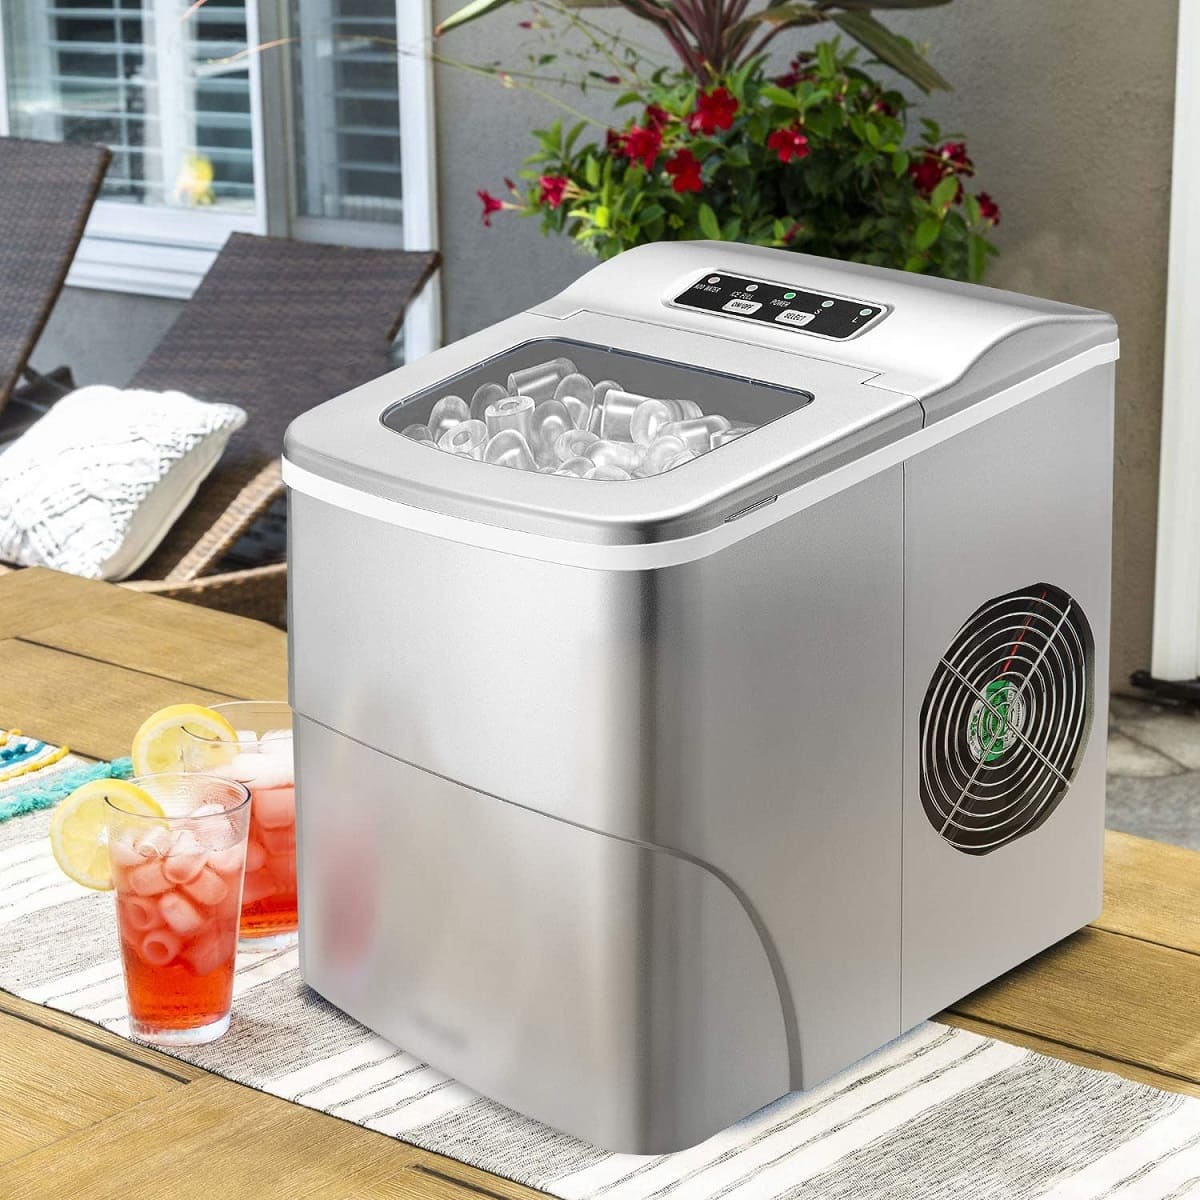 Why Is My Portable Ice Maker Not Working